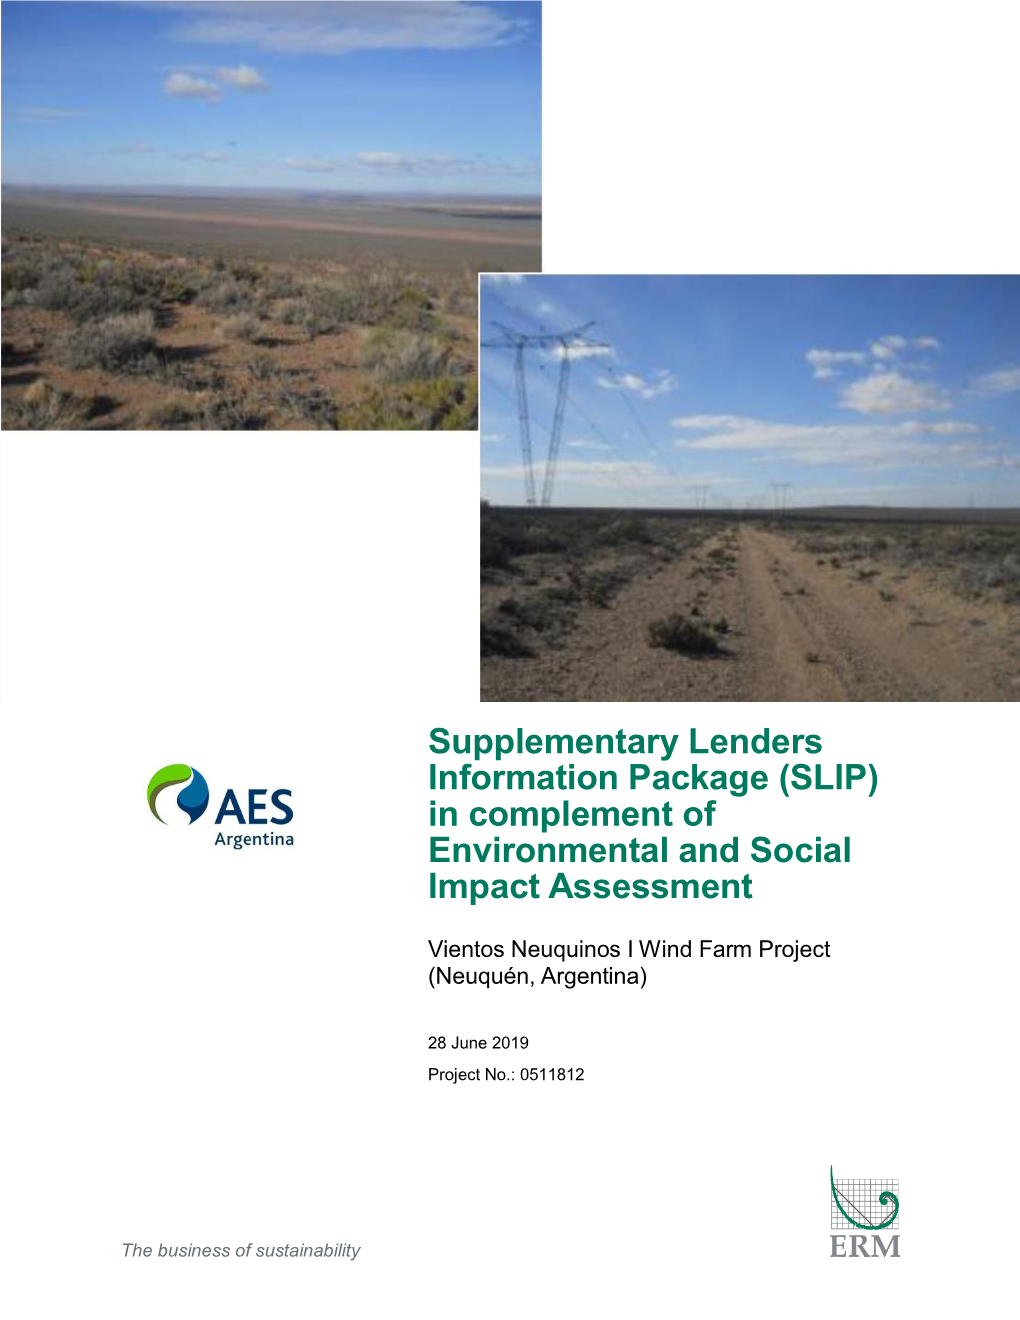 In Complement of Environmental and Social Impact Assessment Document Subtitle Vientos Neuquinos I Wind Farm Project (Neuquén, Argentina) Project No